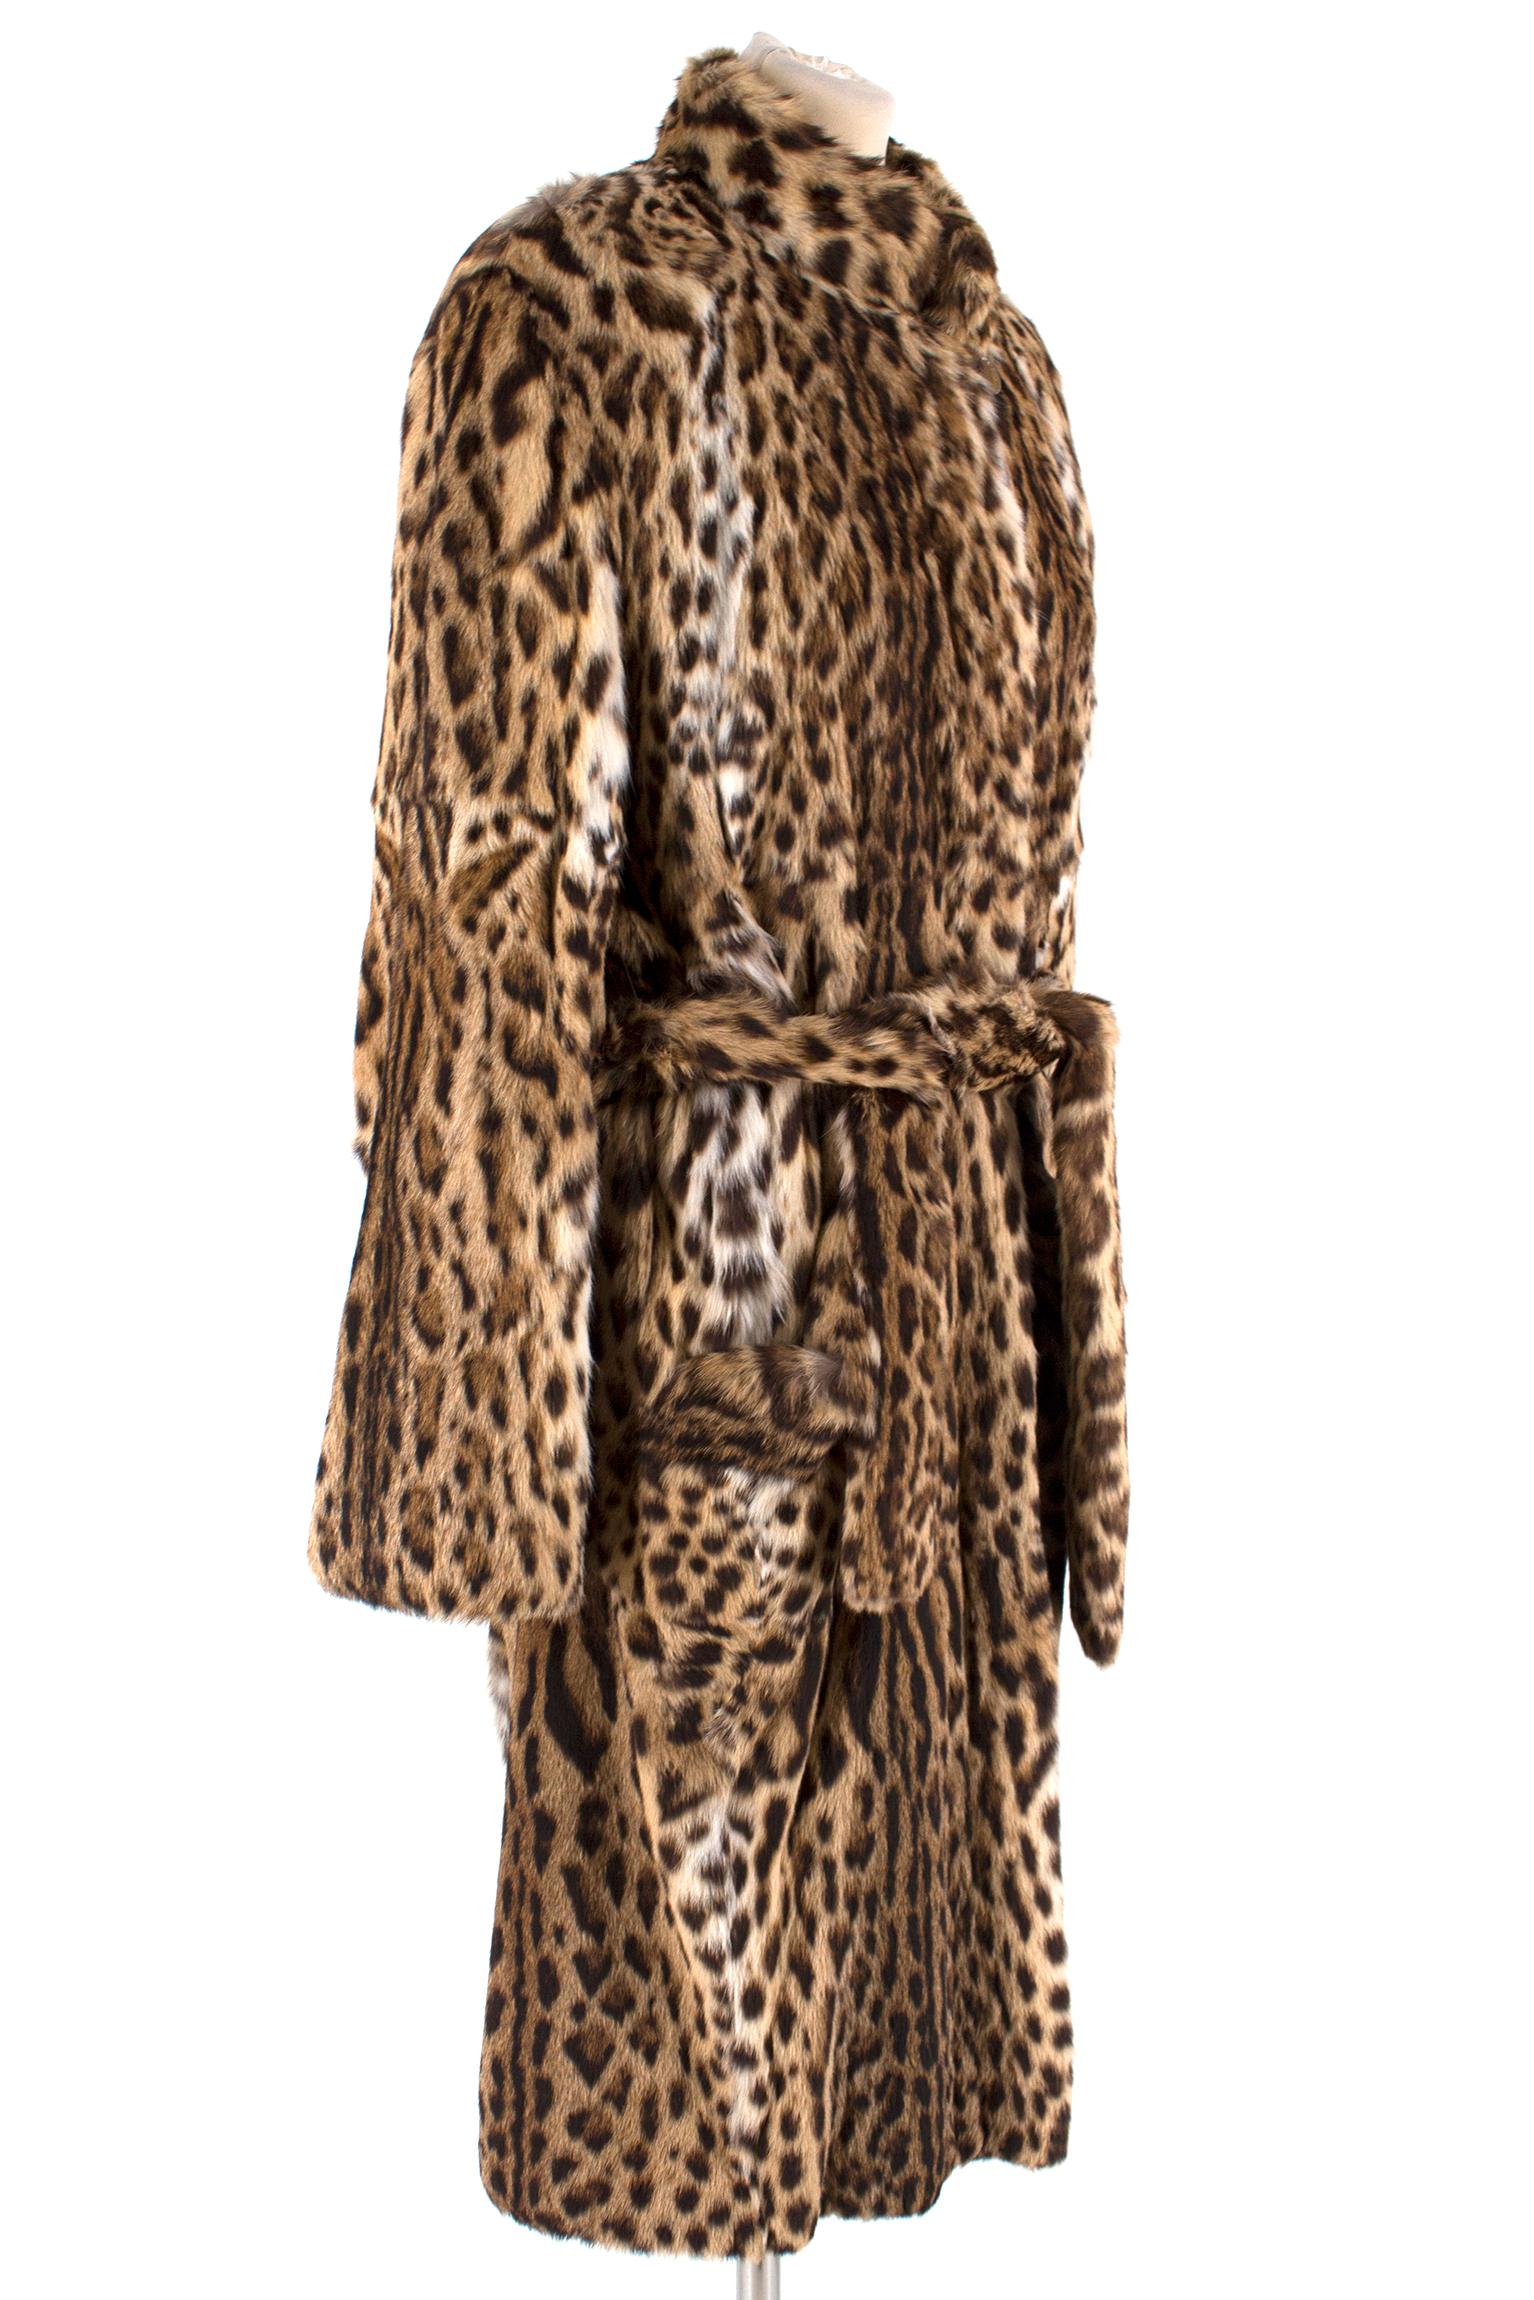 Annabella Pavia Lipicat Fur Coat

-Full length lined lipicat fur coat
-Button and hook and eye closure
-Two front pockets
-Features belt with bow tie closure
-Shoulder pads

Please note, these items are pre-owned and may show signs of being stored